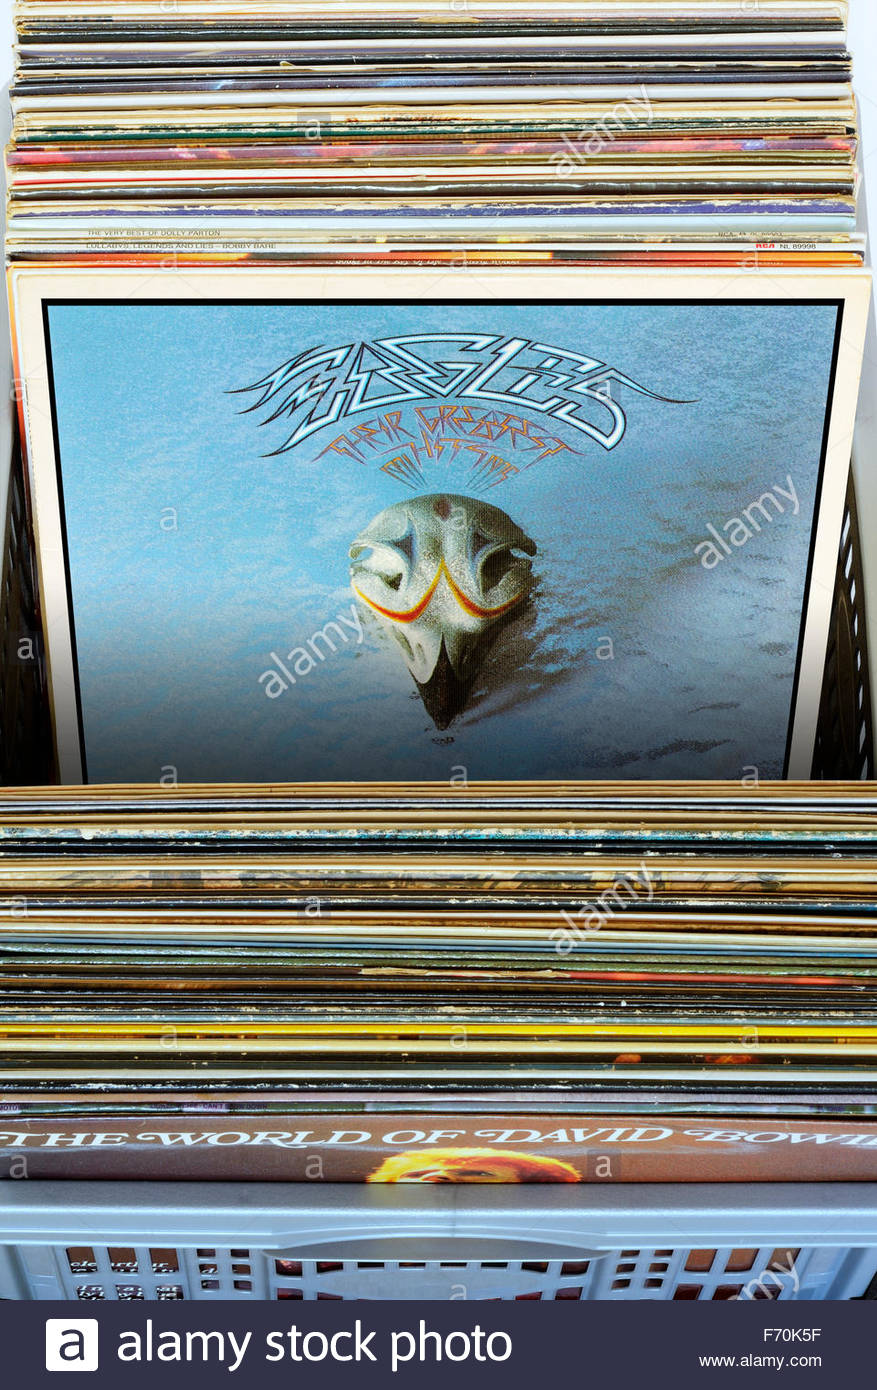 Box Of Secondhand Lp Records Eagles 1976 Album Their Greatest Hits Stock Photo Alamy